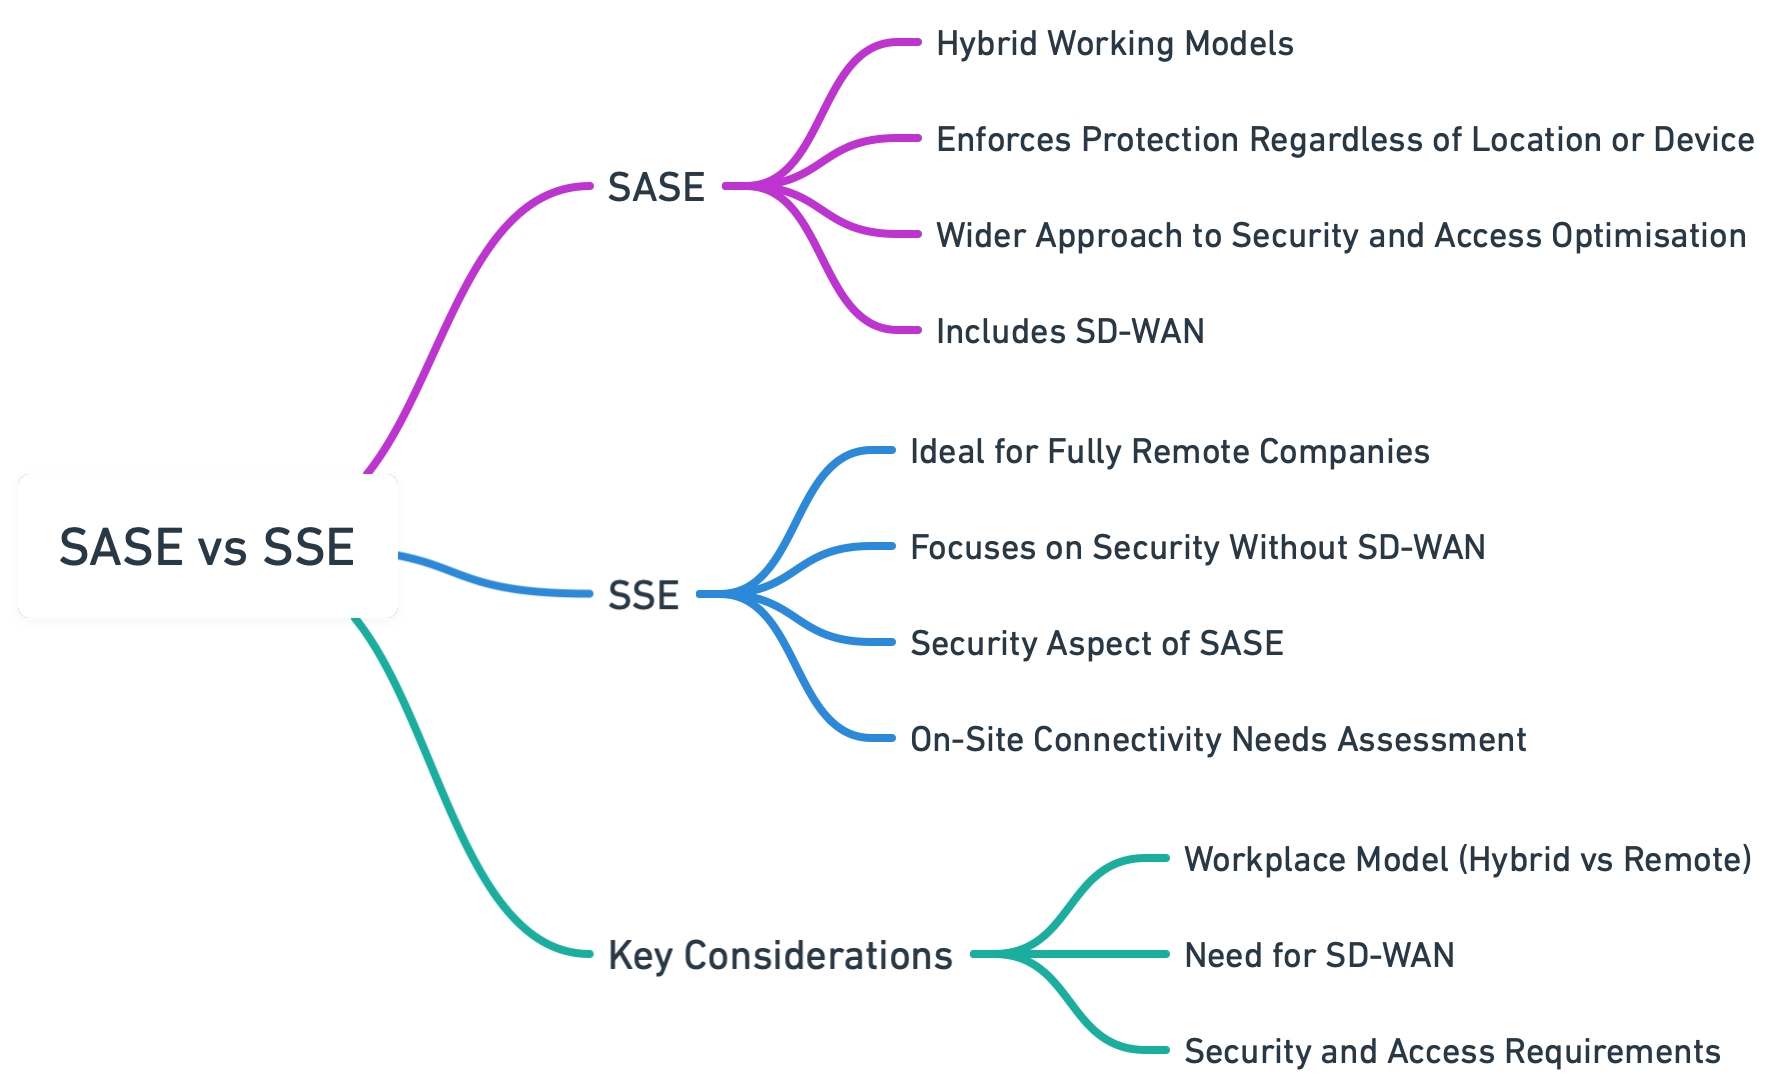 What are the differences between SASE vs SSE